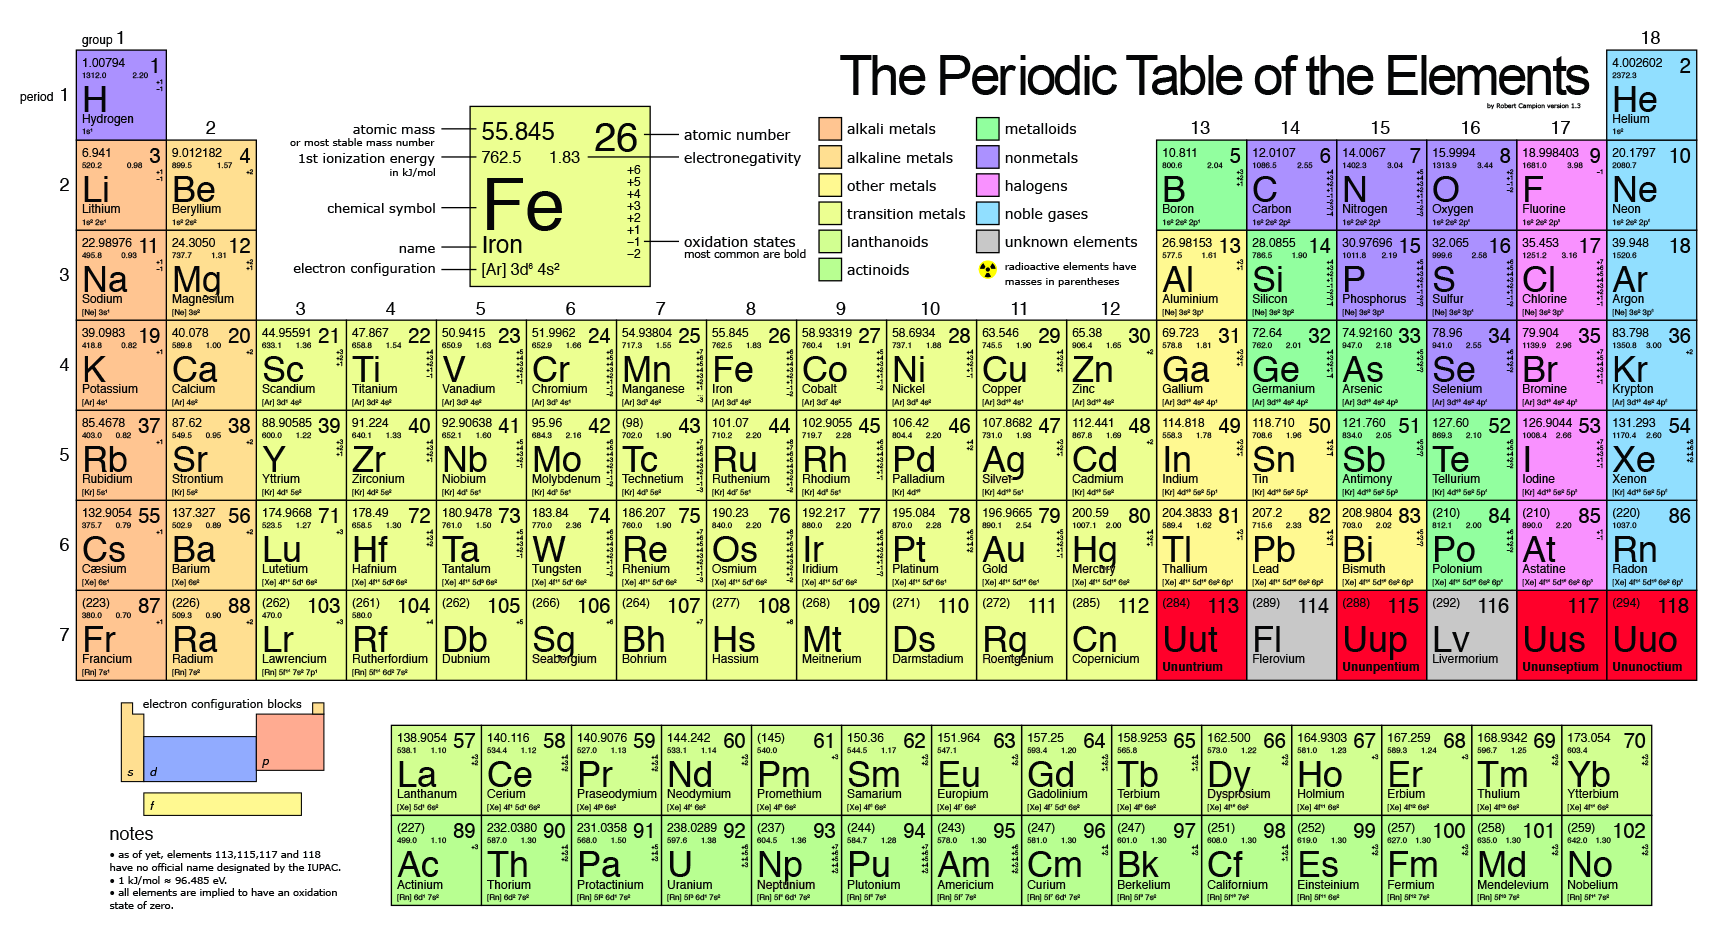 http://www.futurity.org/periodic-table-new-elements-1087782-2/